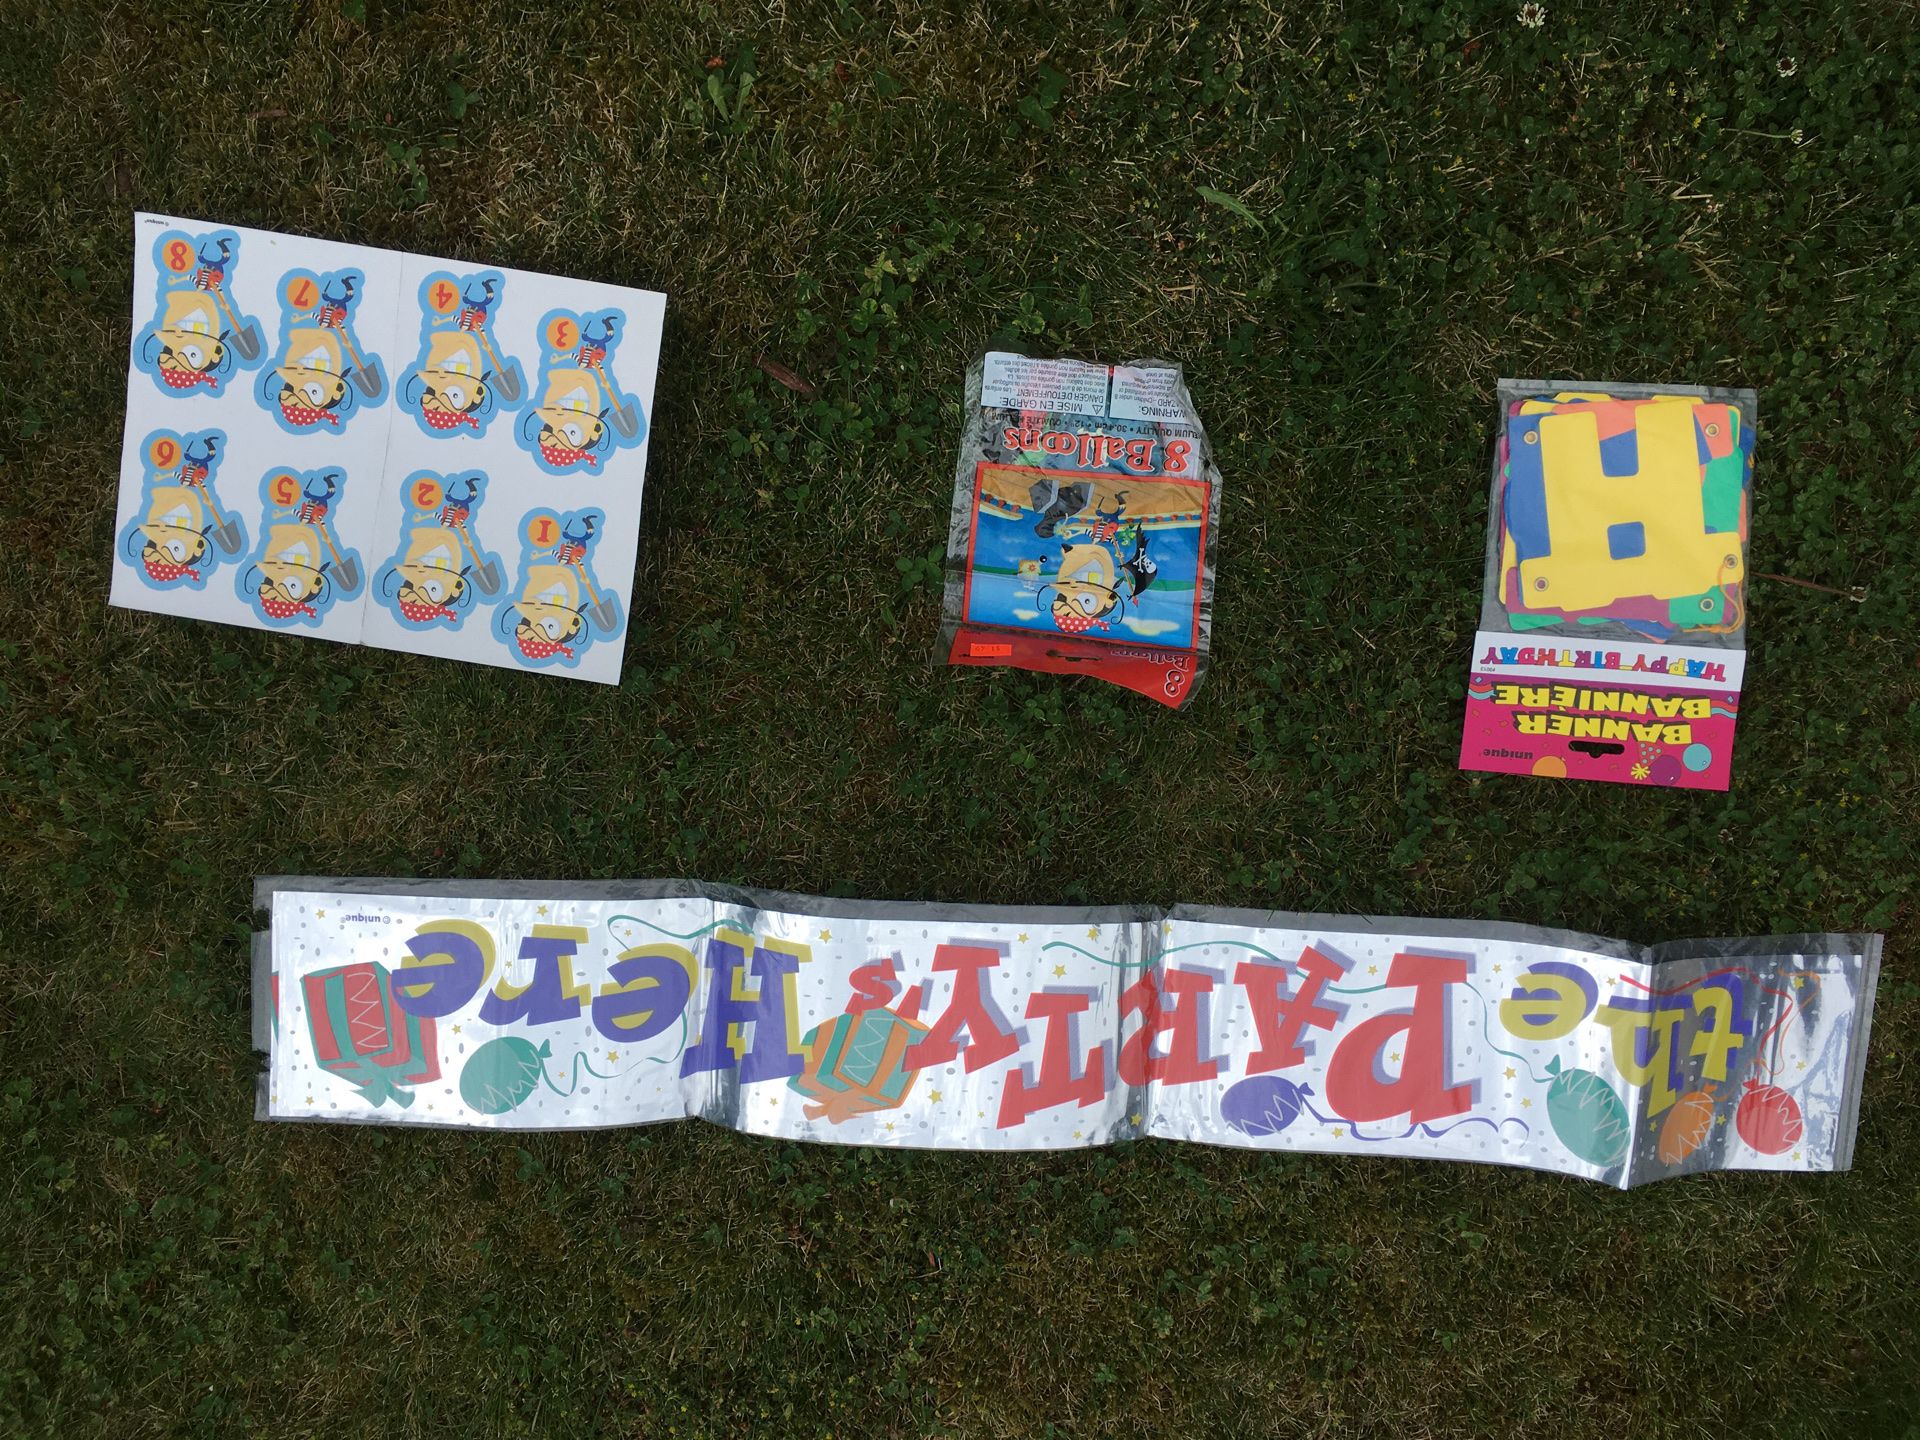 Never opened brand new pirate birthday set. The party’s here sign, Happy birthday Banner, 8 pirate balloons and 8 pirate stickers.